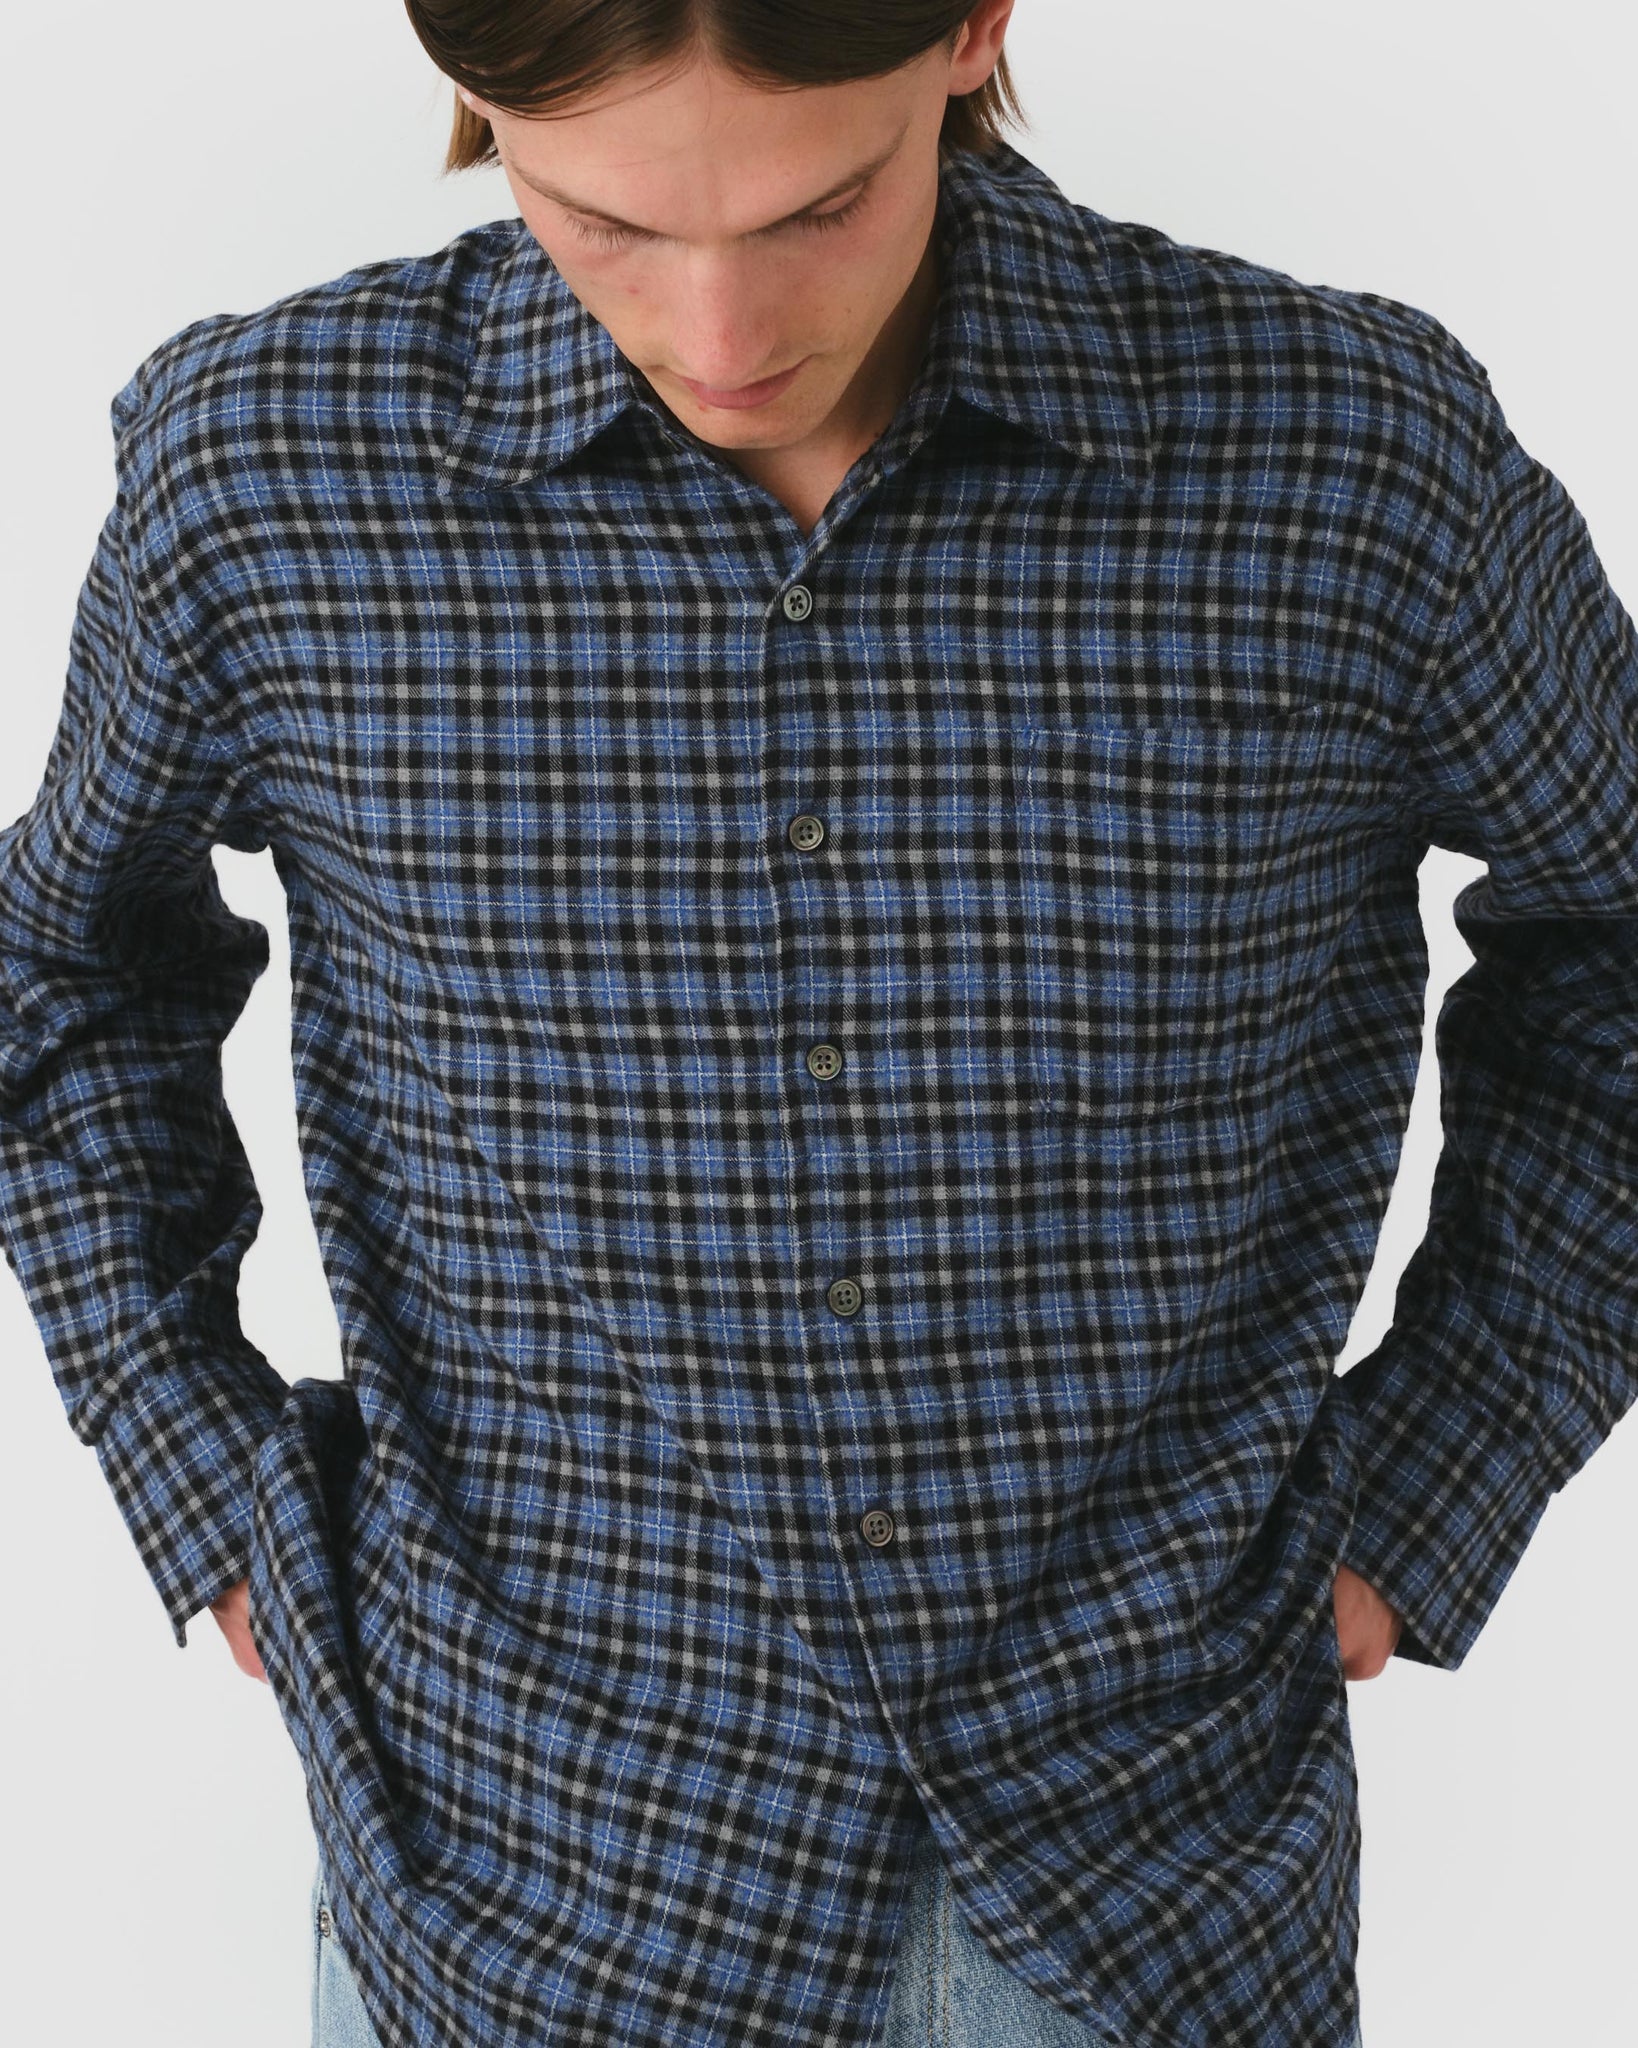 Above Shirt - Cantrell Check – grocery